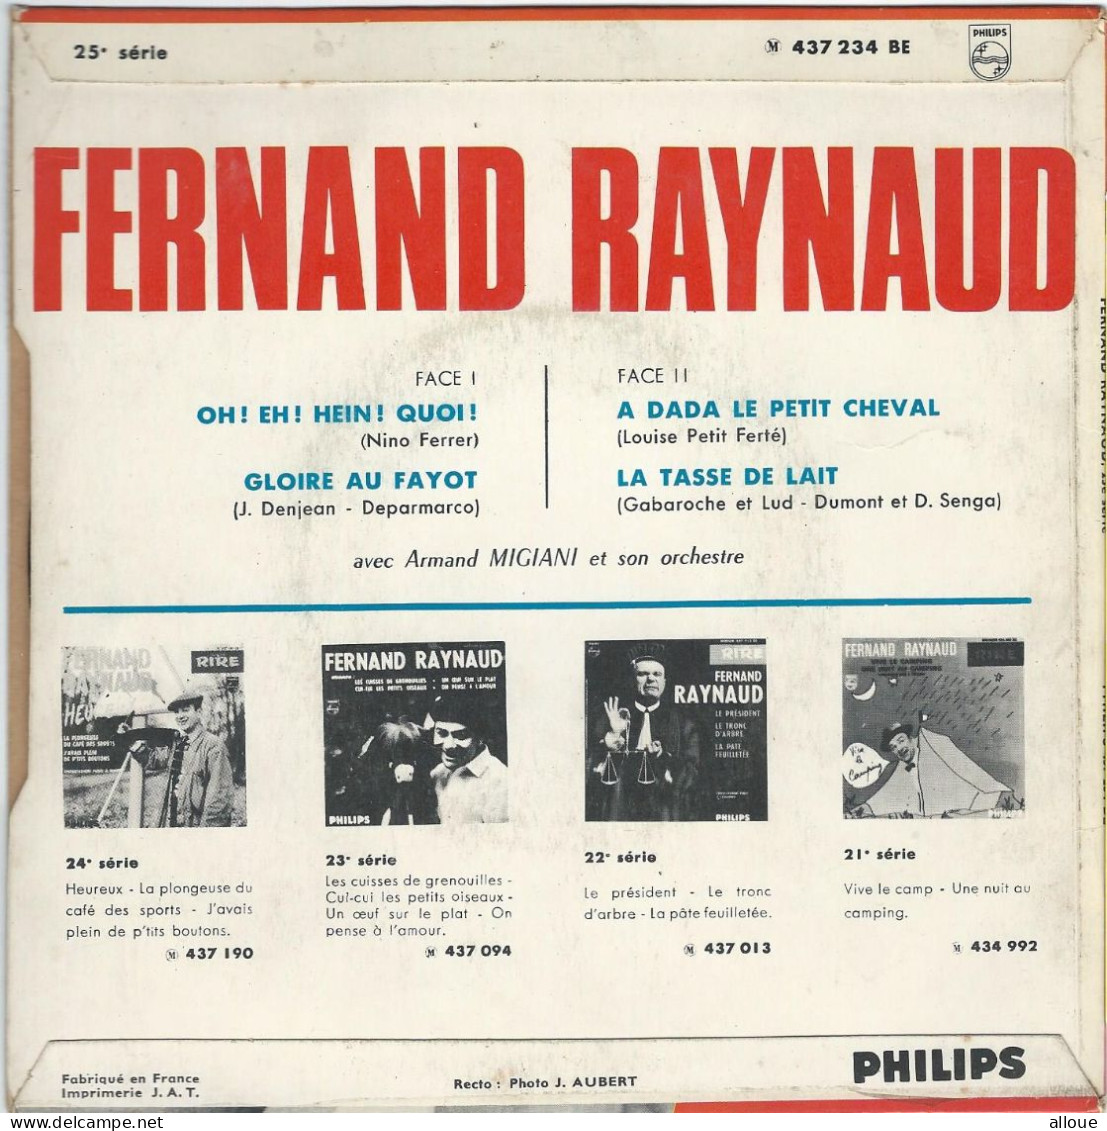 FERNAND RAYNAUD - FR EP - OH! EH! HEIN! QUOI! + 3 - Humour, Cabaret